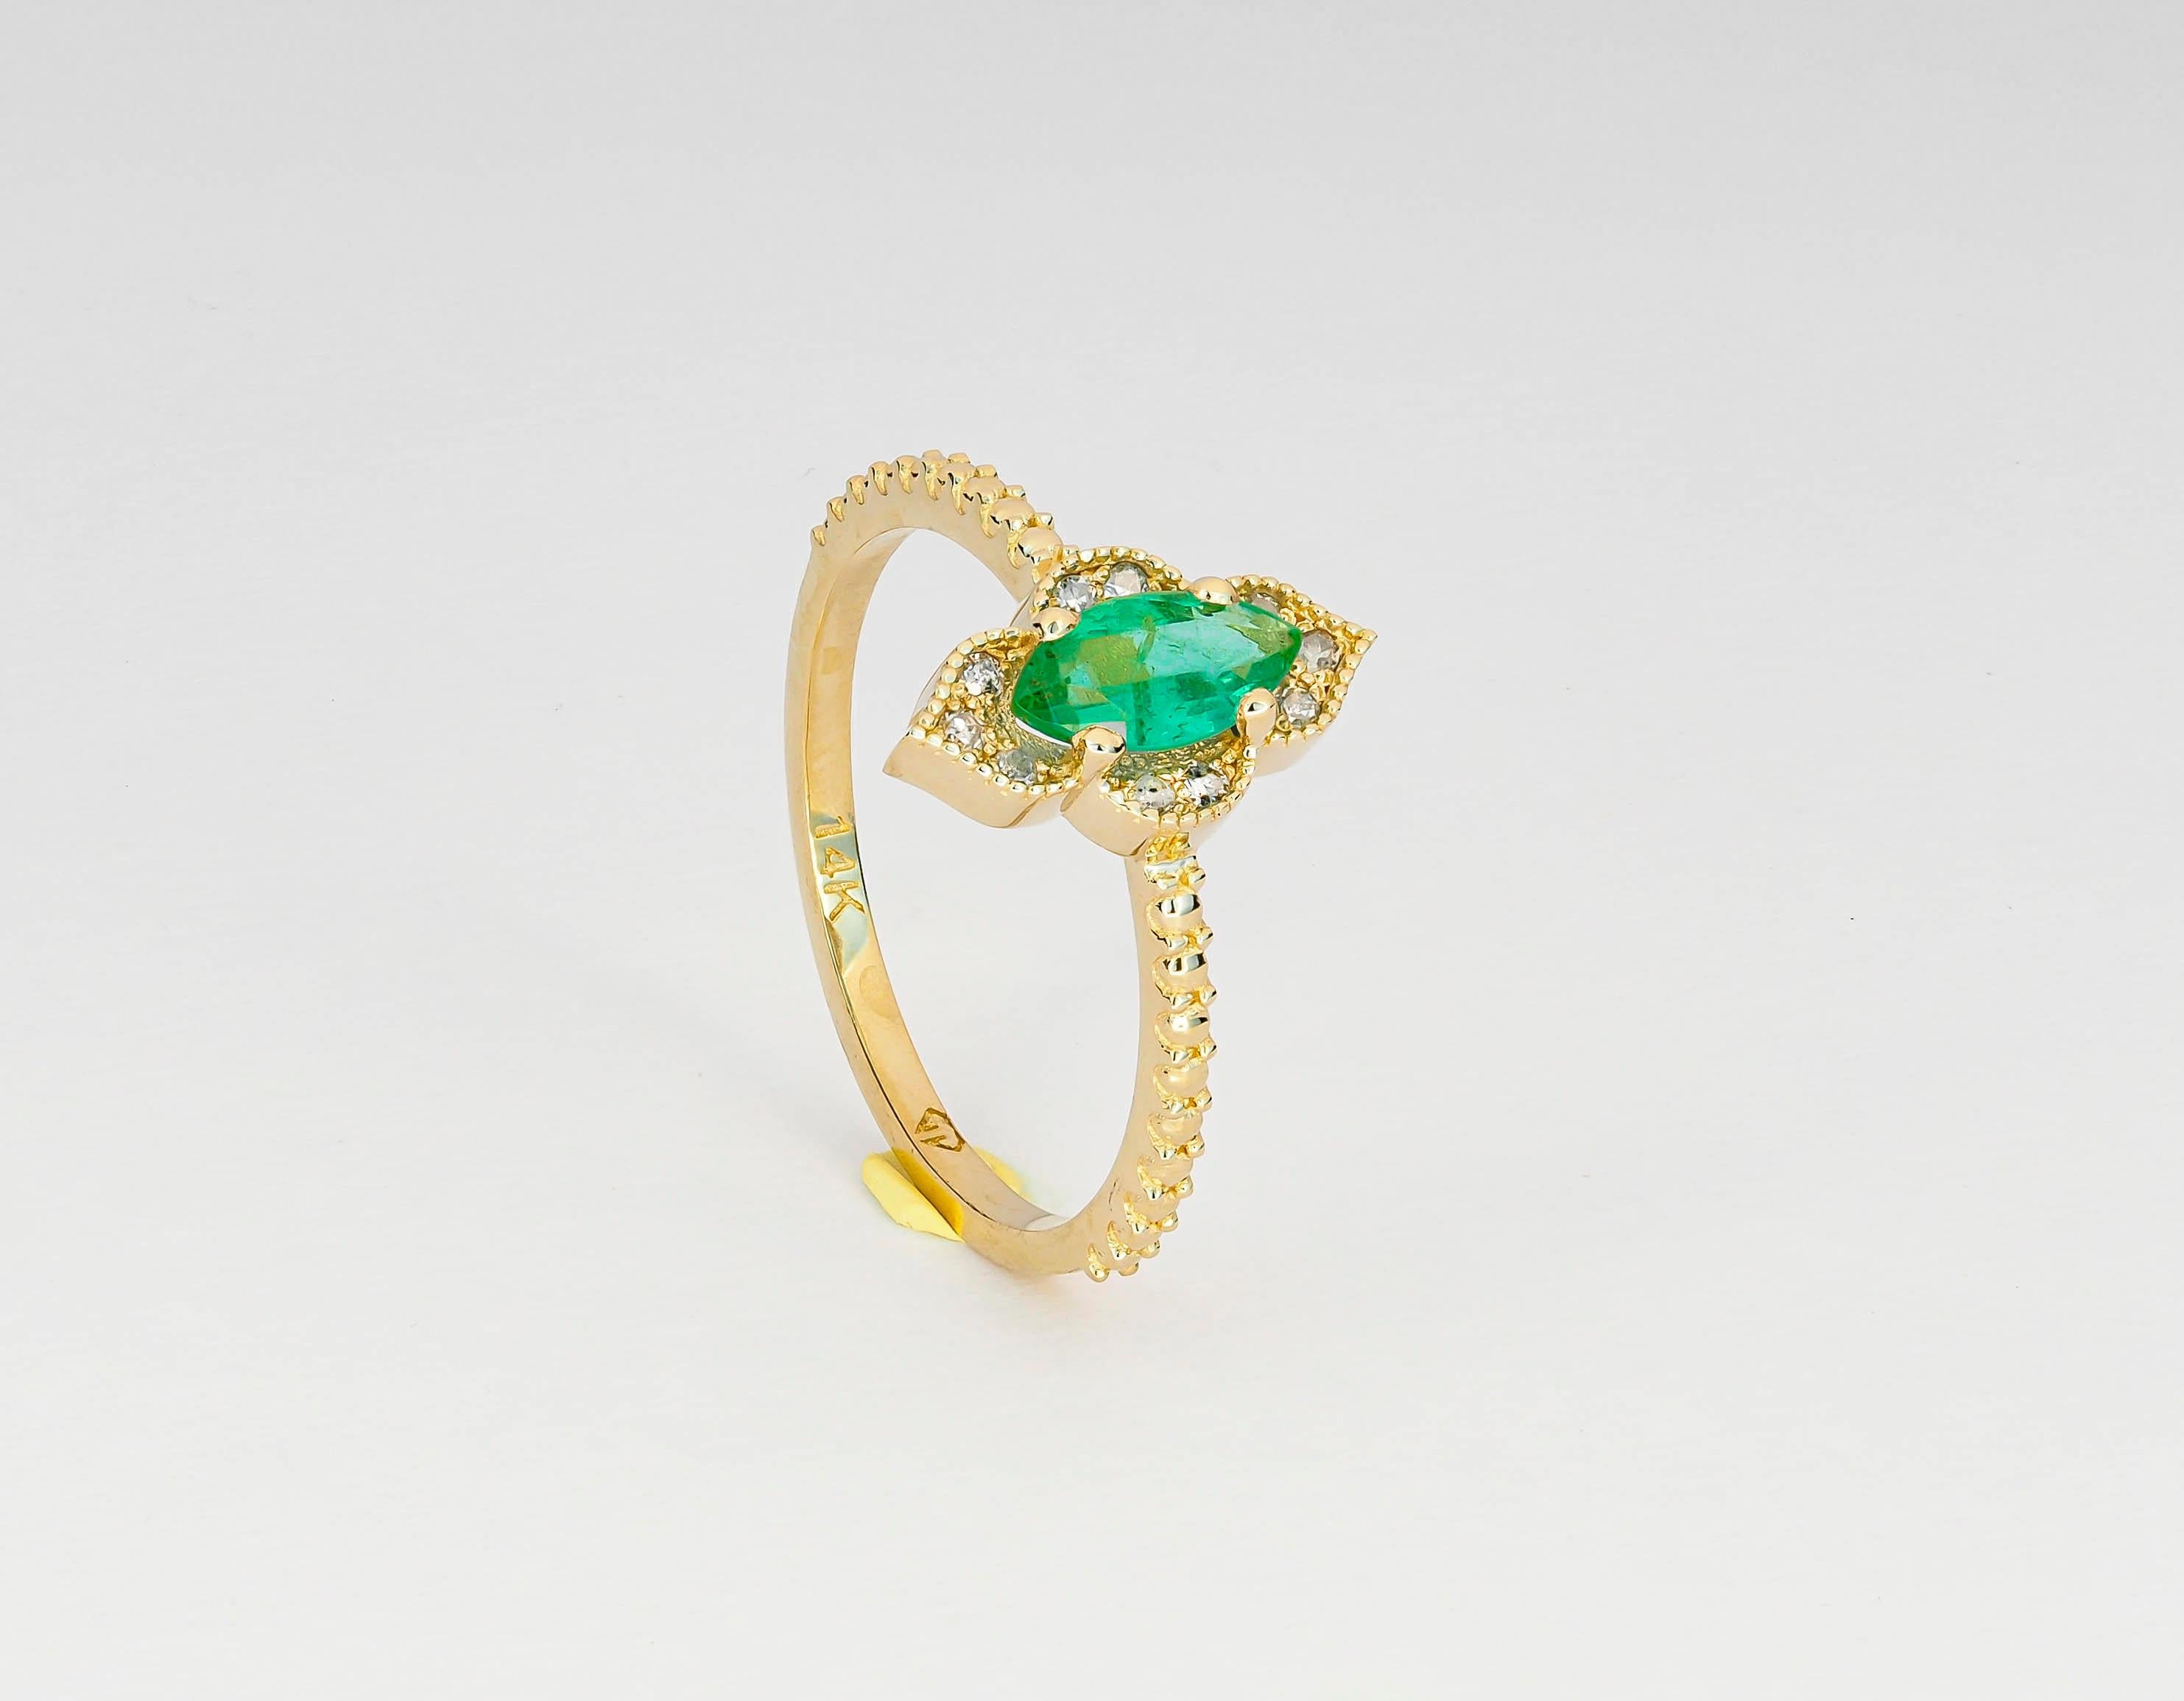 14 karat gold ring with natural emerald and diamonds. May birthstone emerald ring. Emerald 14k gold ring. Emerald vintage ring. Marquise emerald ring.

Weight approx. 2.02 g. depends from size
Central stones: Natural emerald
Marquise cut, weight -